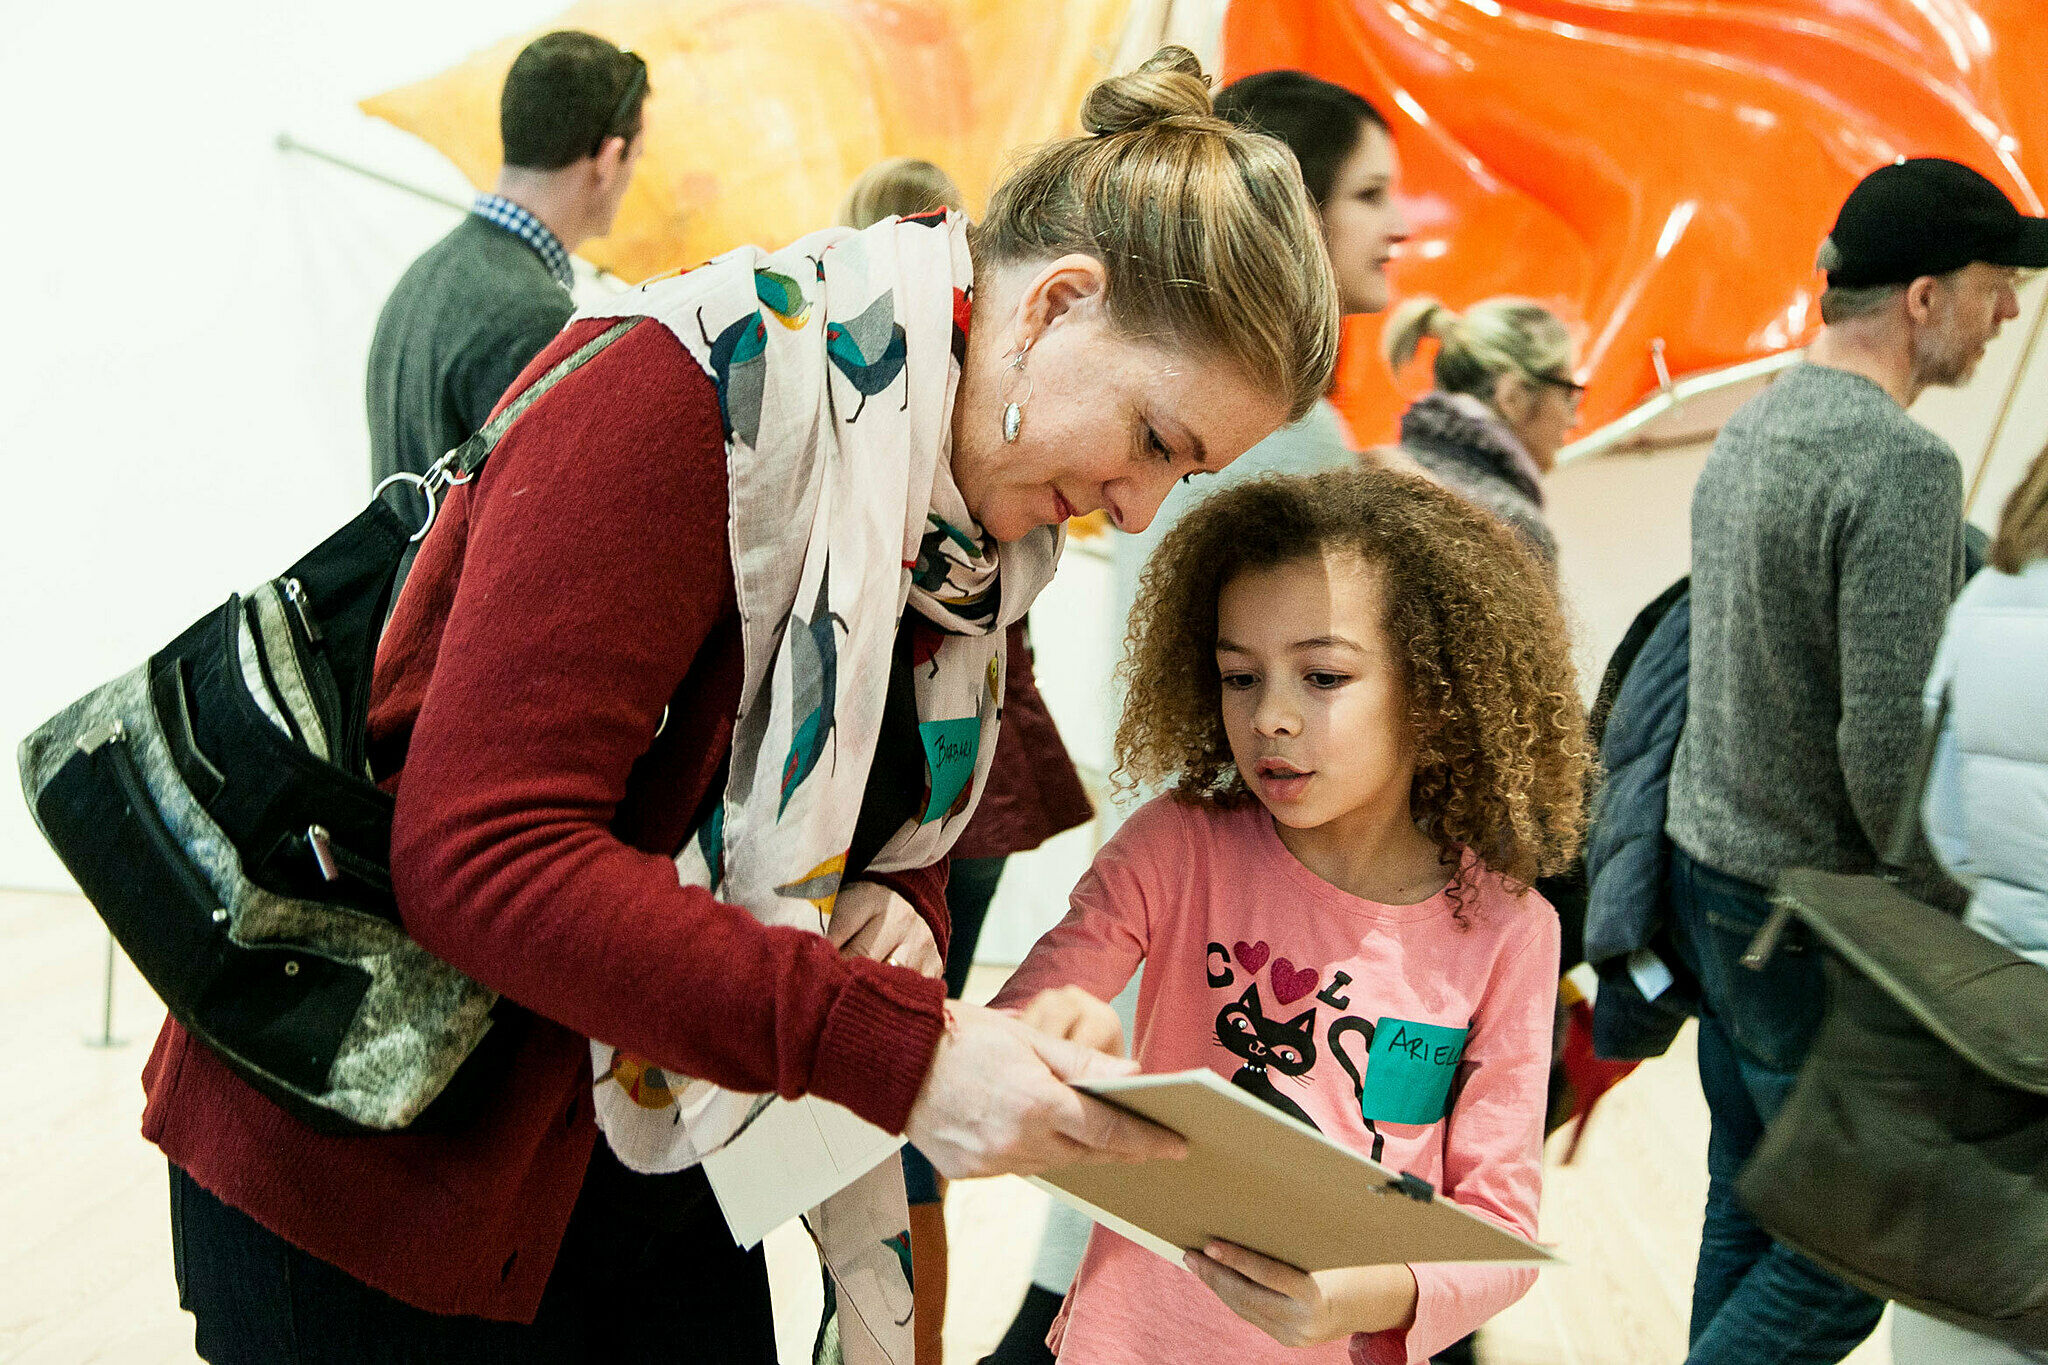 A Mother and child look at a sketchpad in the galleries